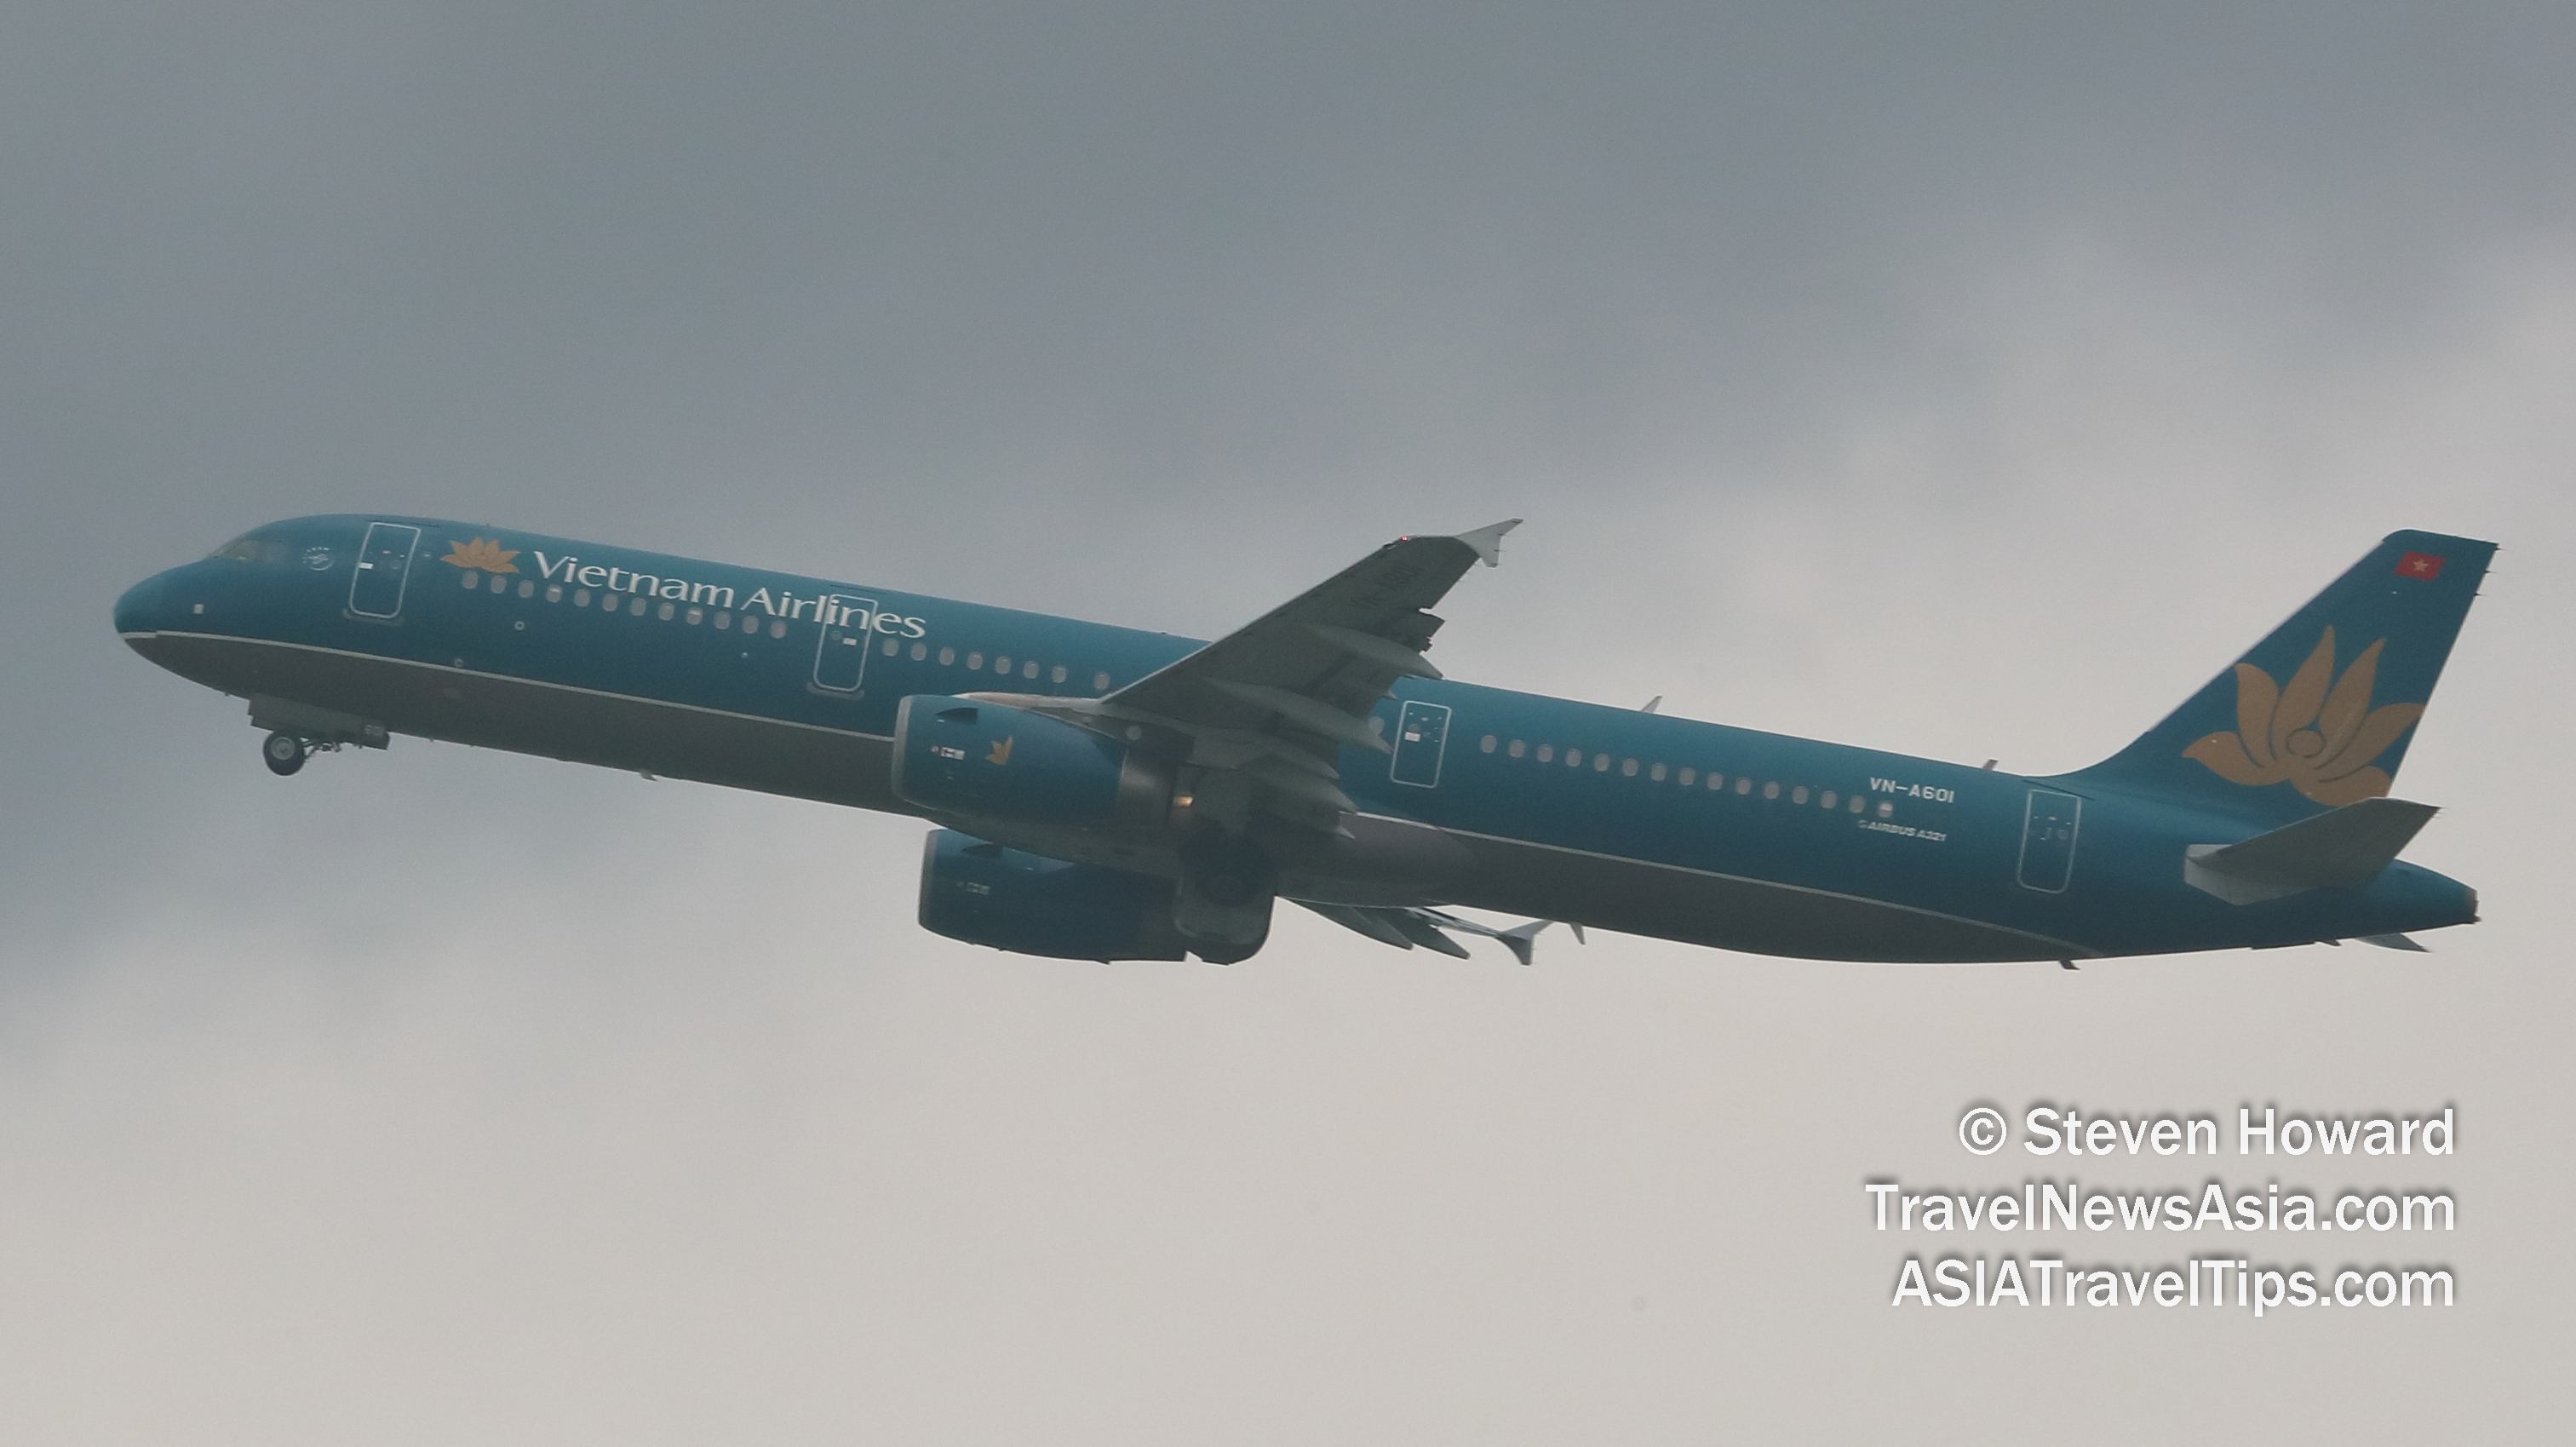 Vietnam Airlines Airbus A321 reg: VN-A601 taking off from Hong Kong International Airport. Picture by Steven Howard of TravelNewsAsia.com Click to enlarge.